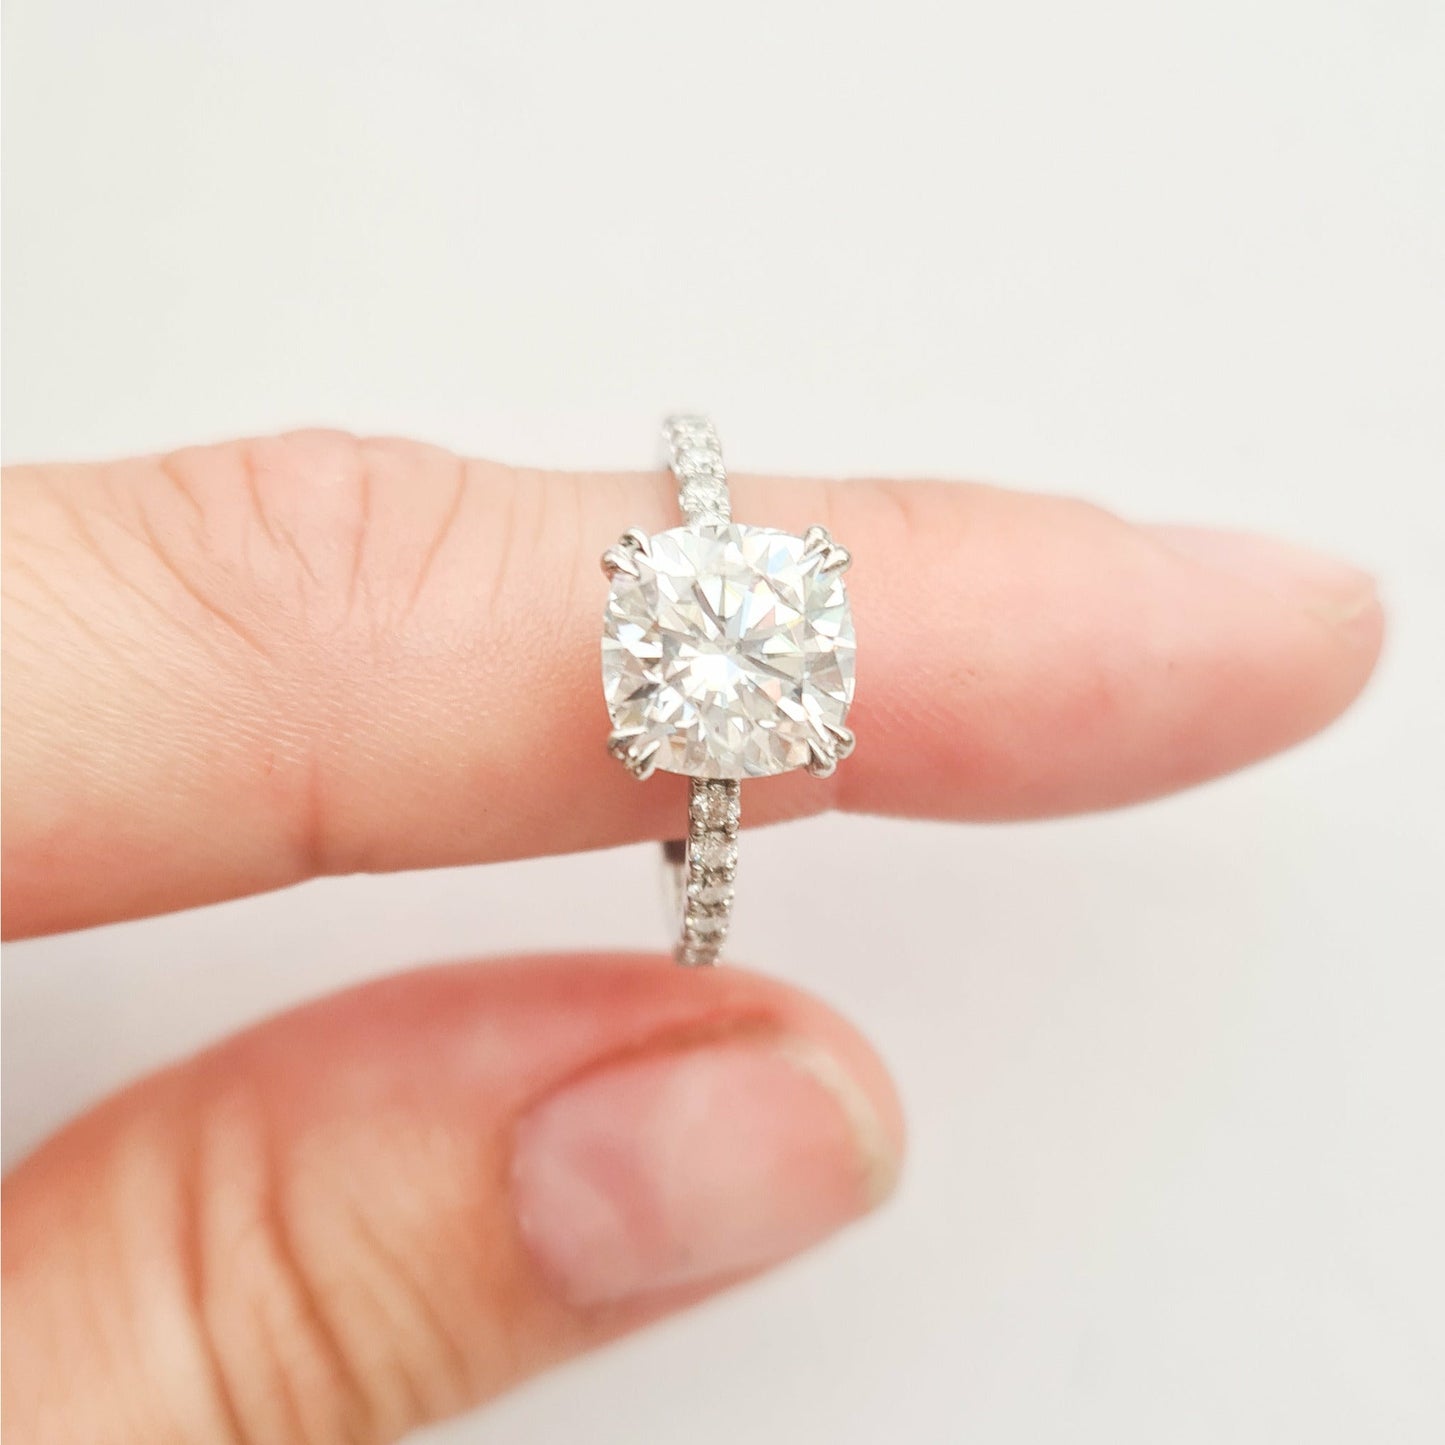 Square cushion cut moissanite engagement ring with double claws on a micropave band